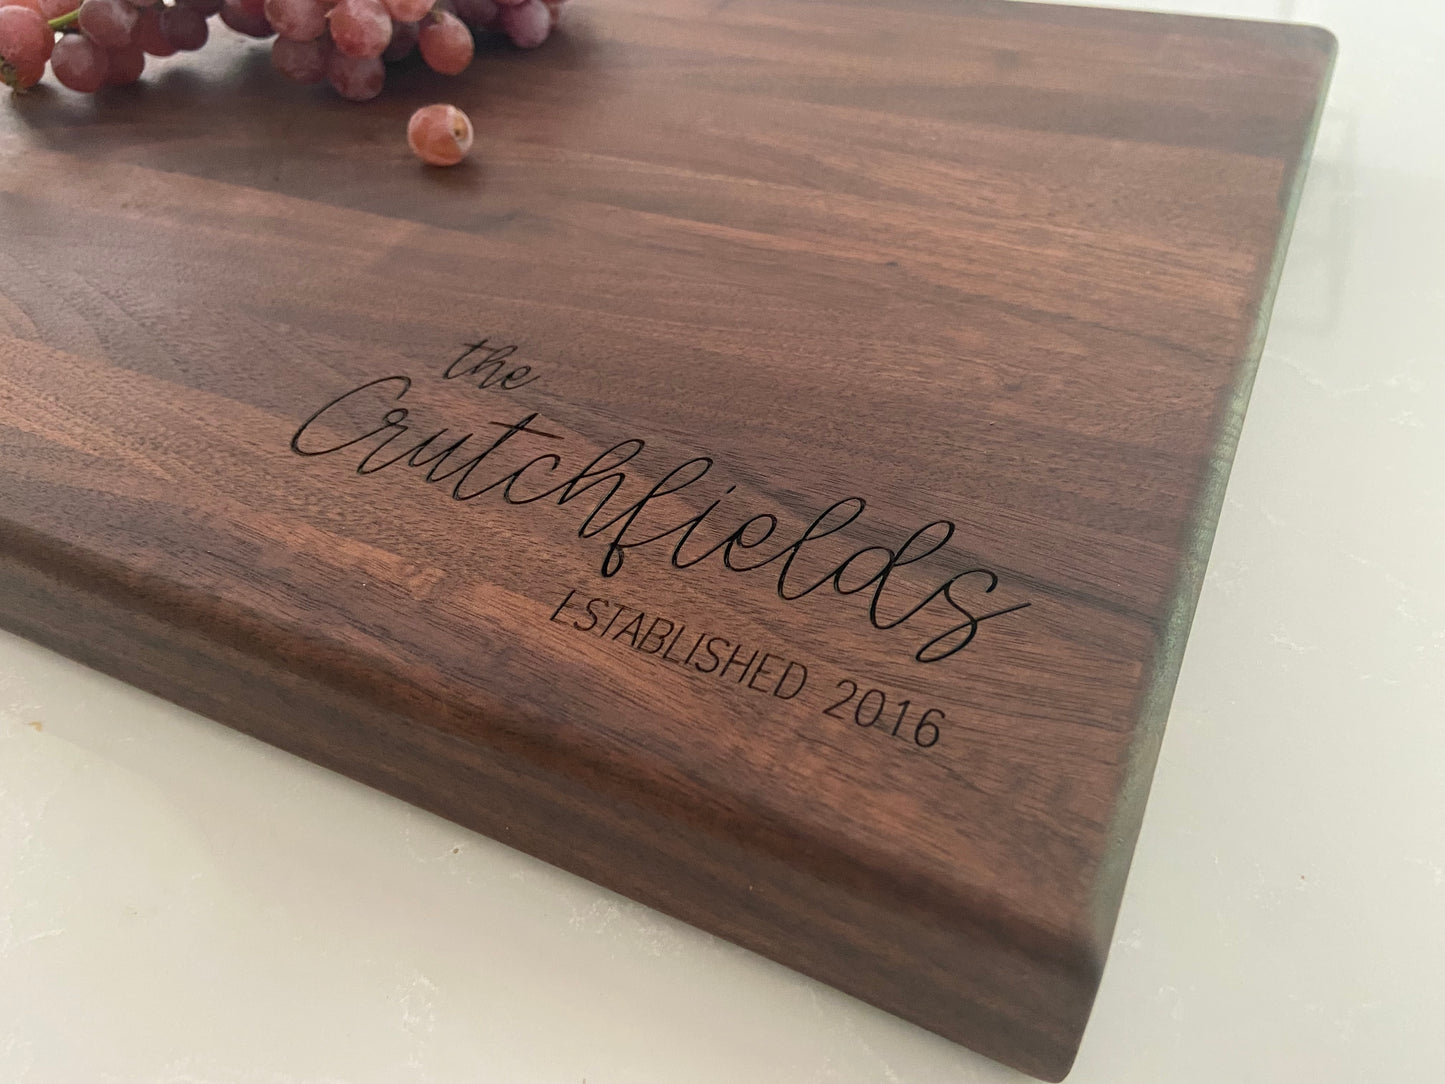 Grace & Elm Wood Wax: Protect and Enhance Cutting Boards